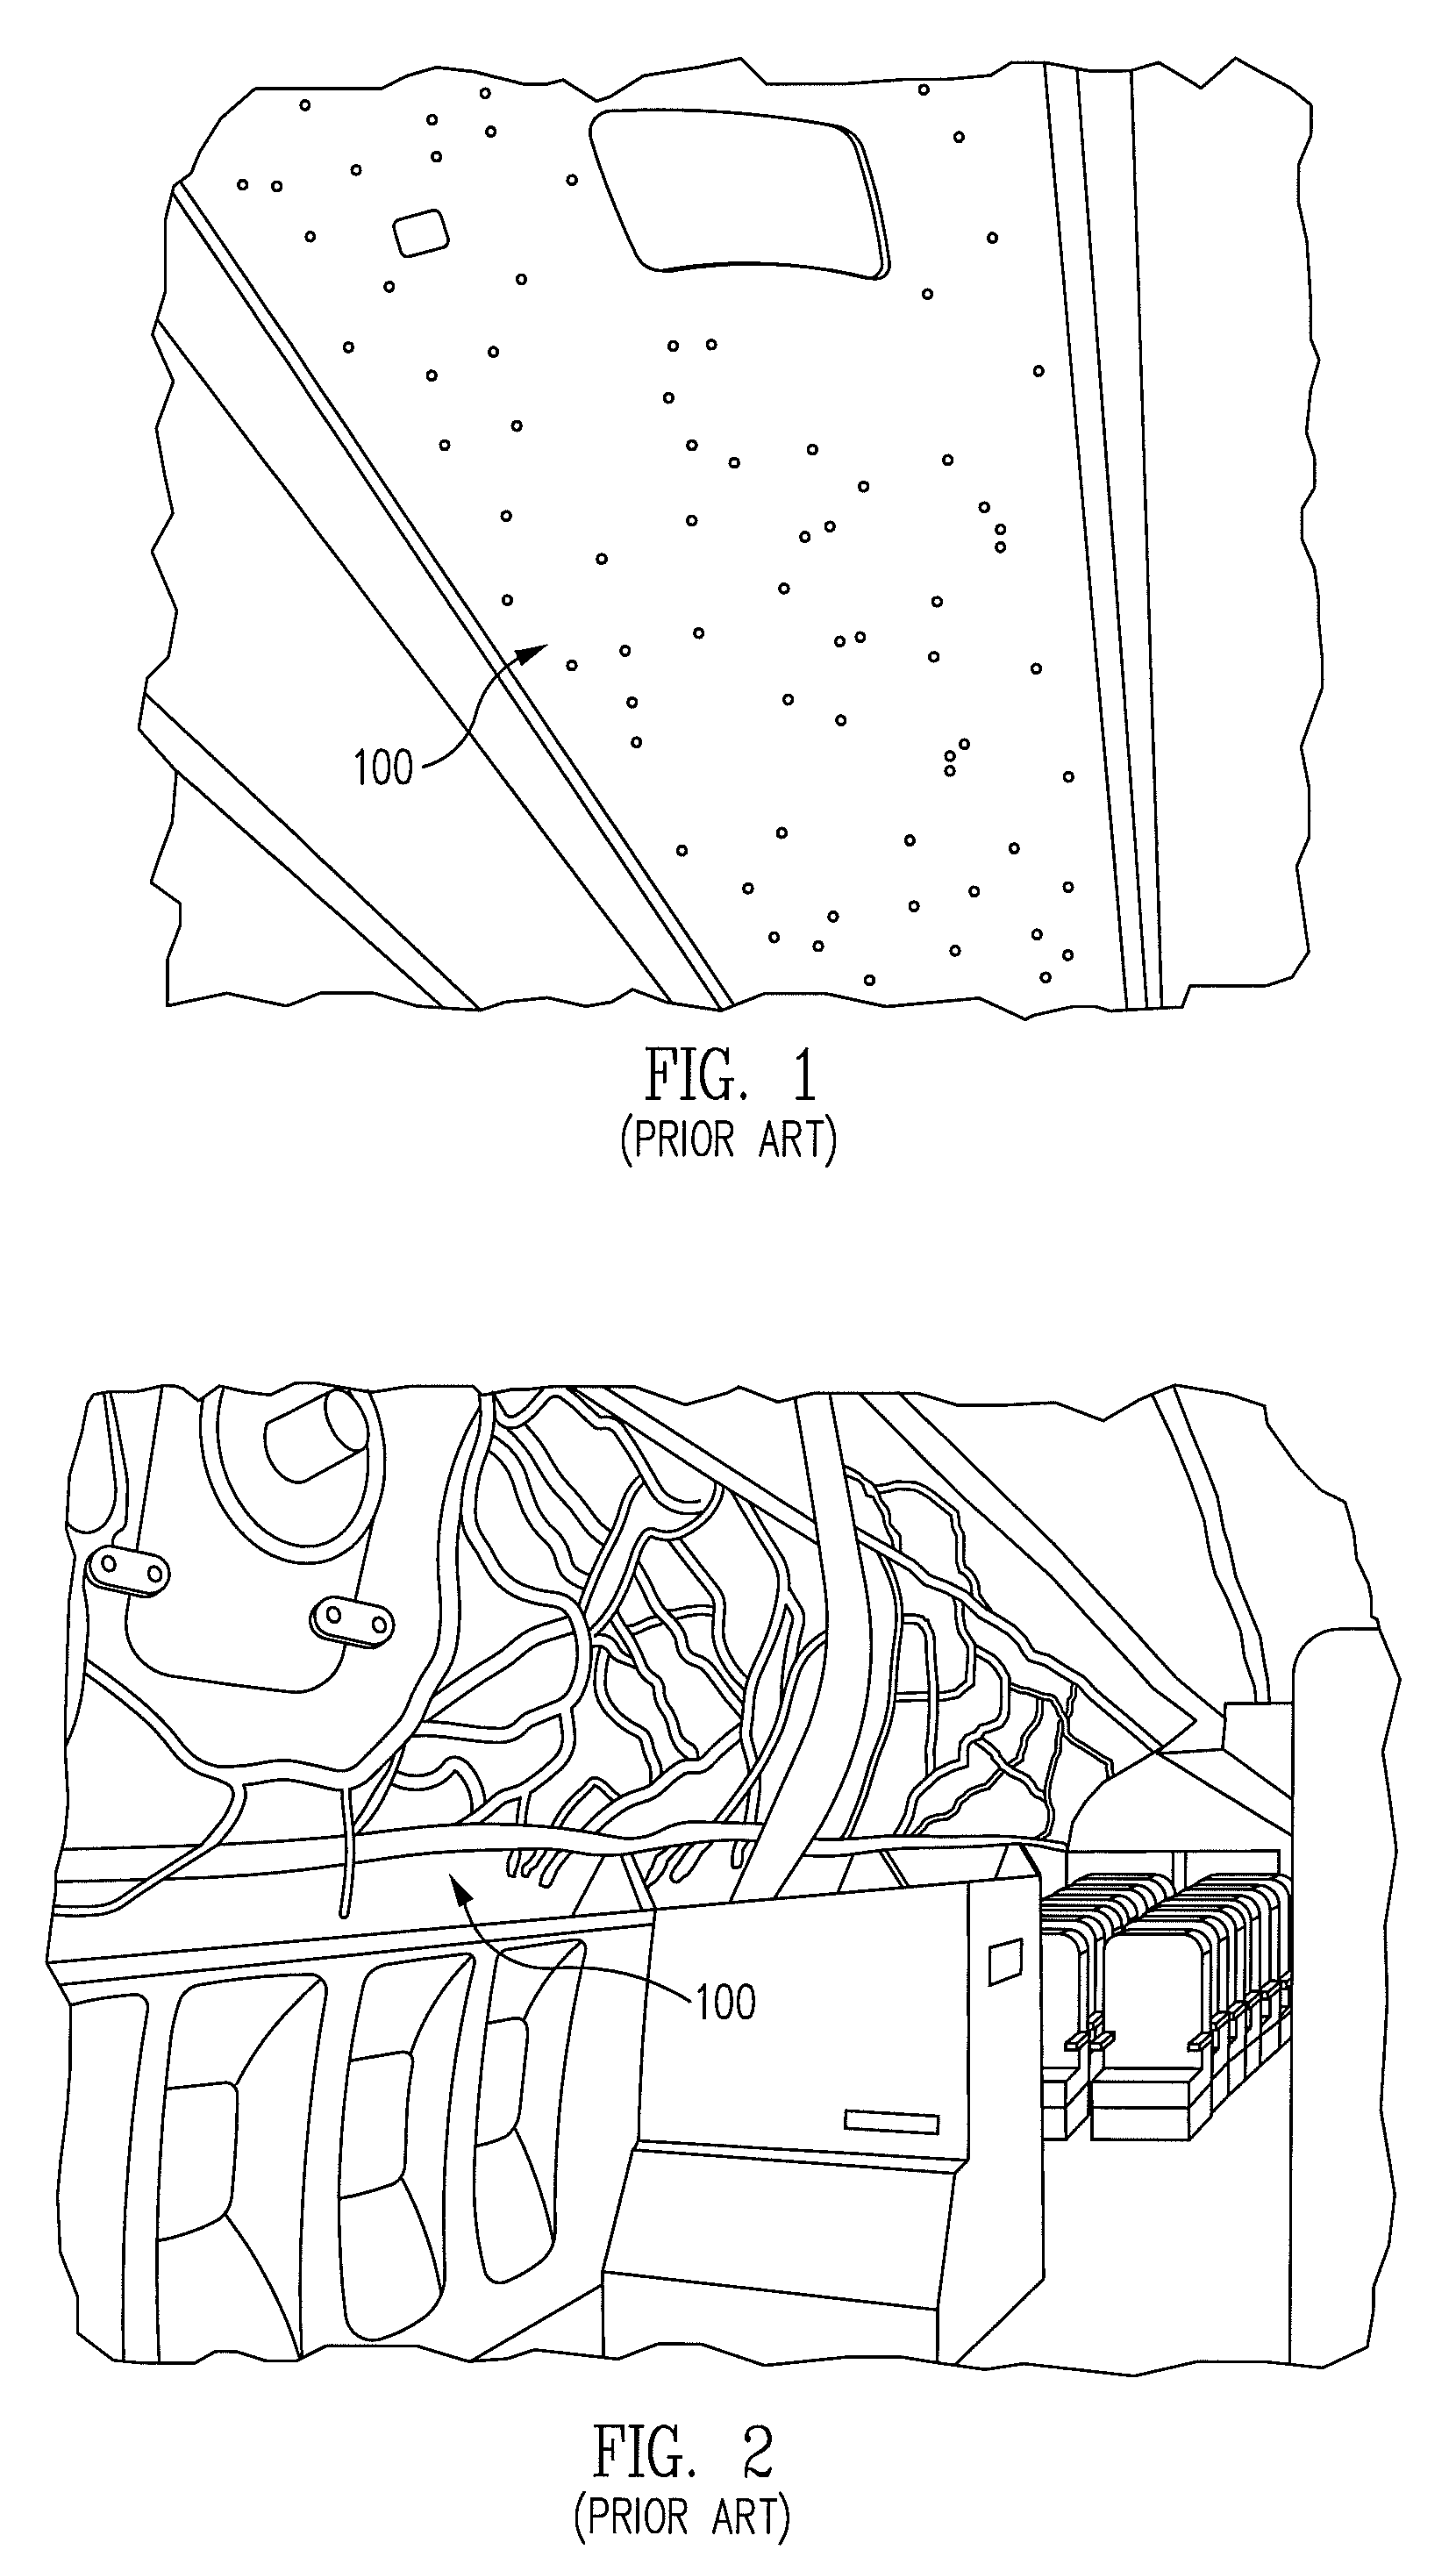 Lighting panels including embedded illumination devices and methods of making such panels